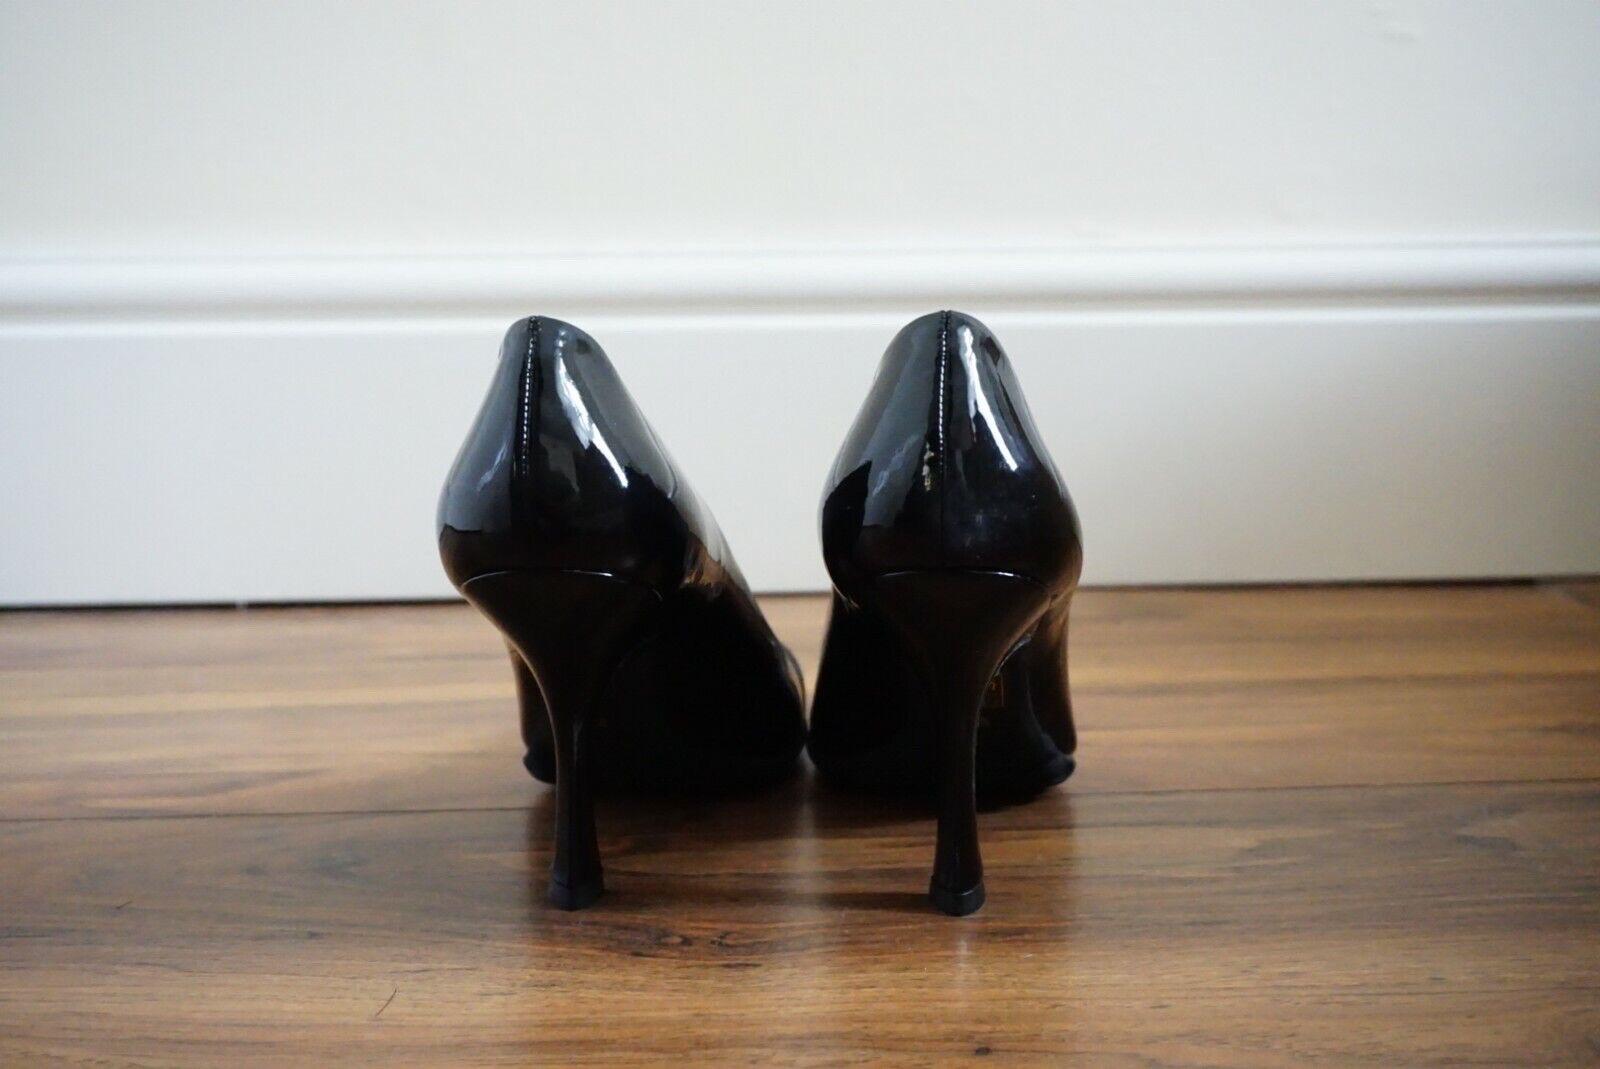 Miu Miu Vernice Patent Leather Pointed Heels Rubber Grip Soles Black 37.5 BNWT For Sale 1